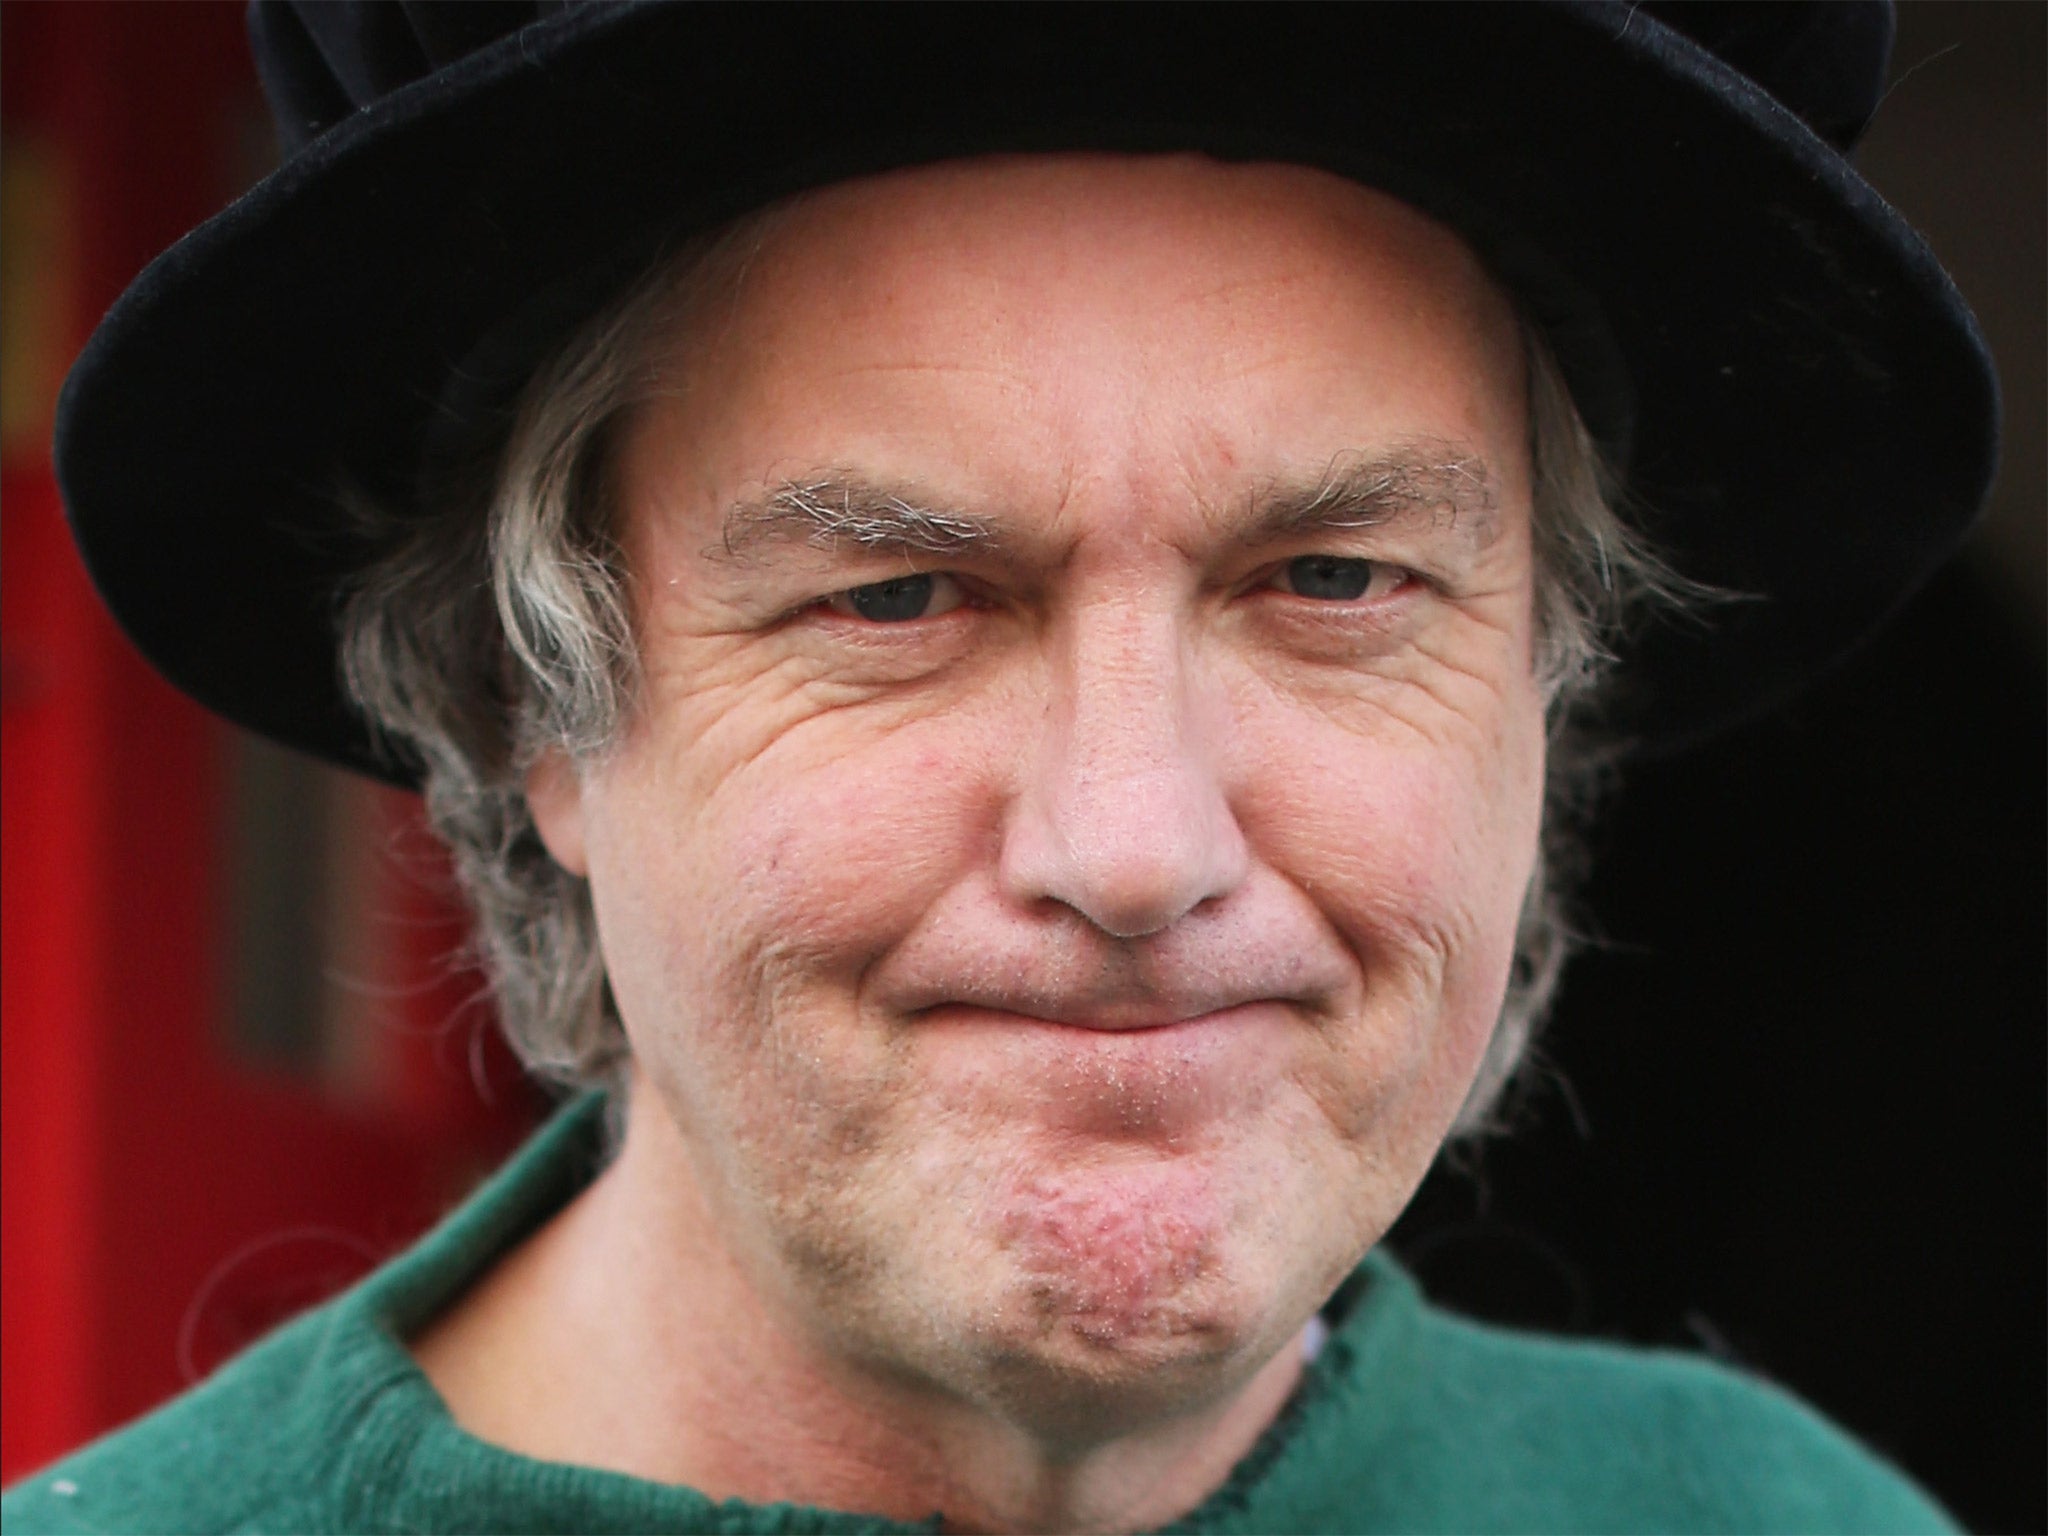 James May said Clarkson was a ‘knob’, but he liked him